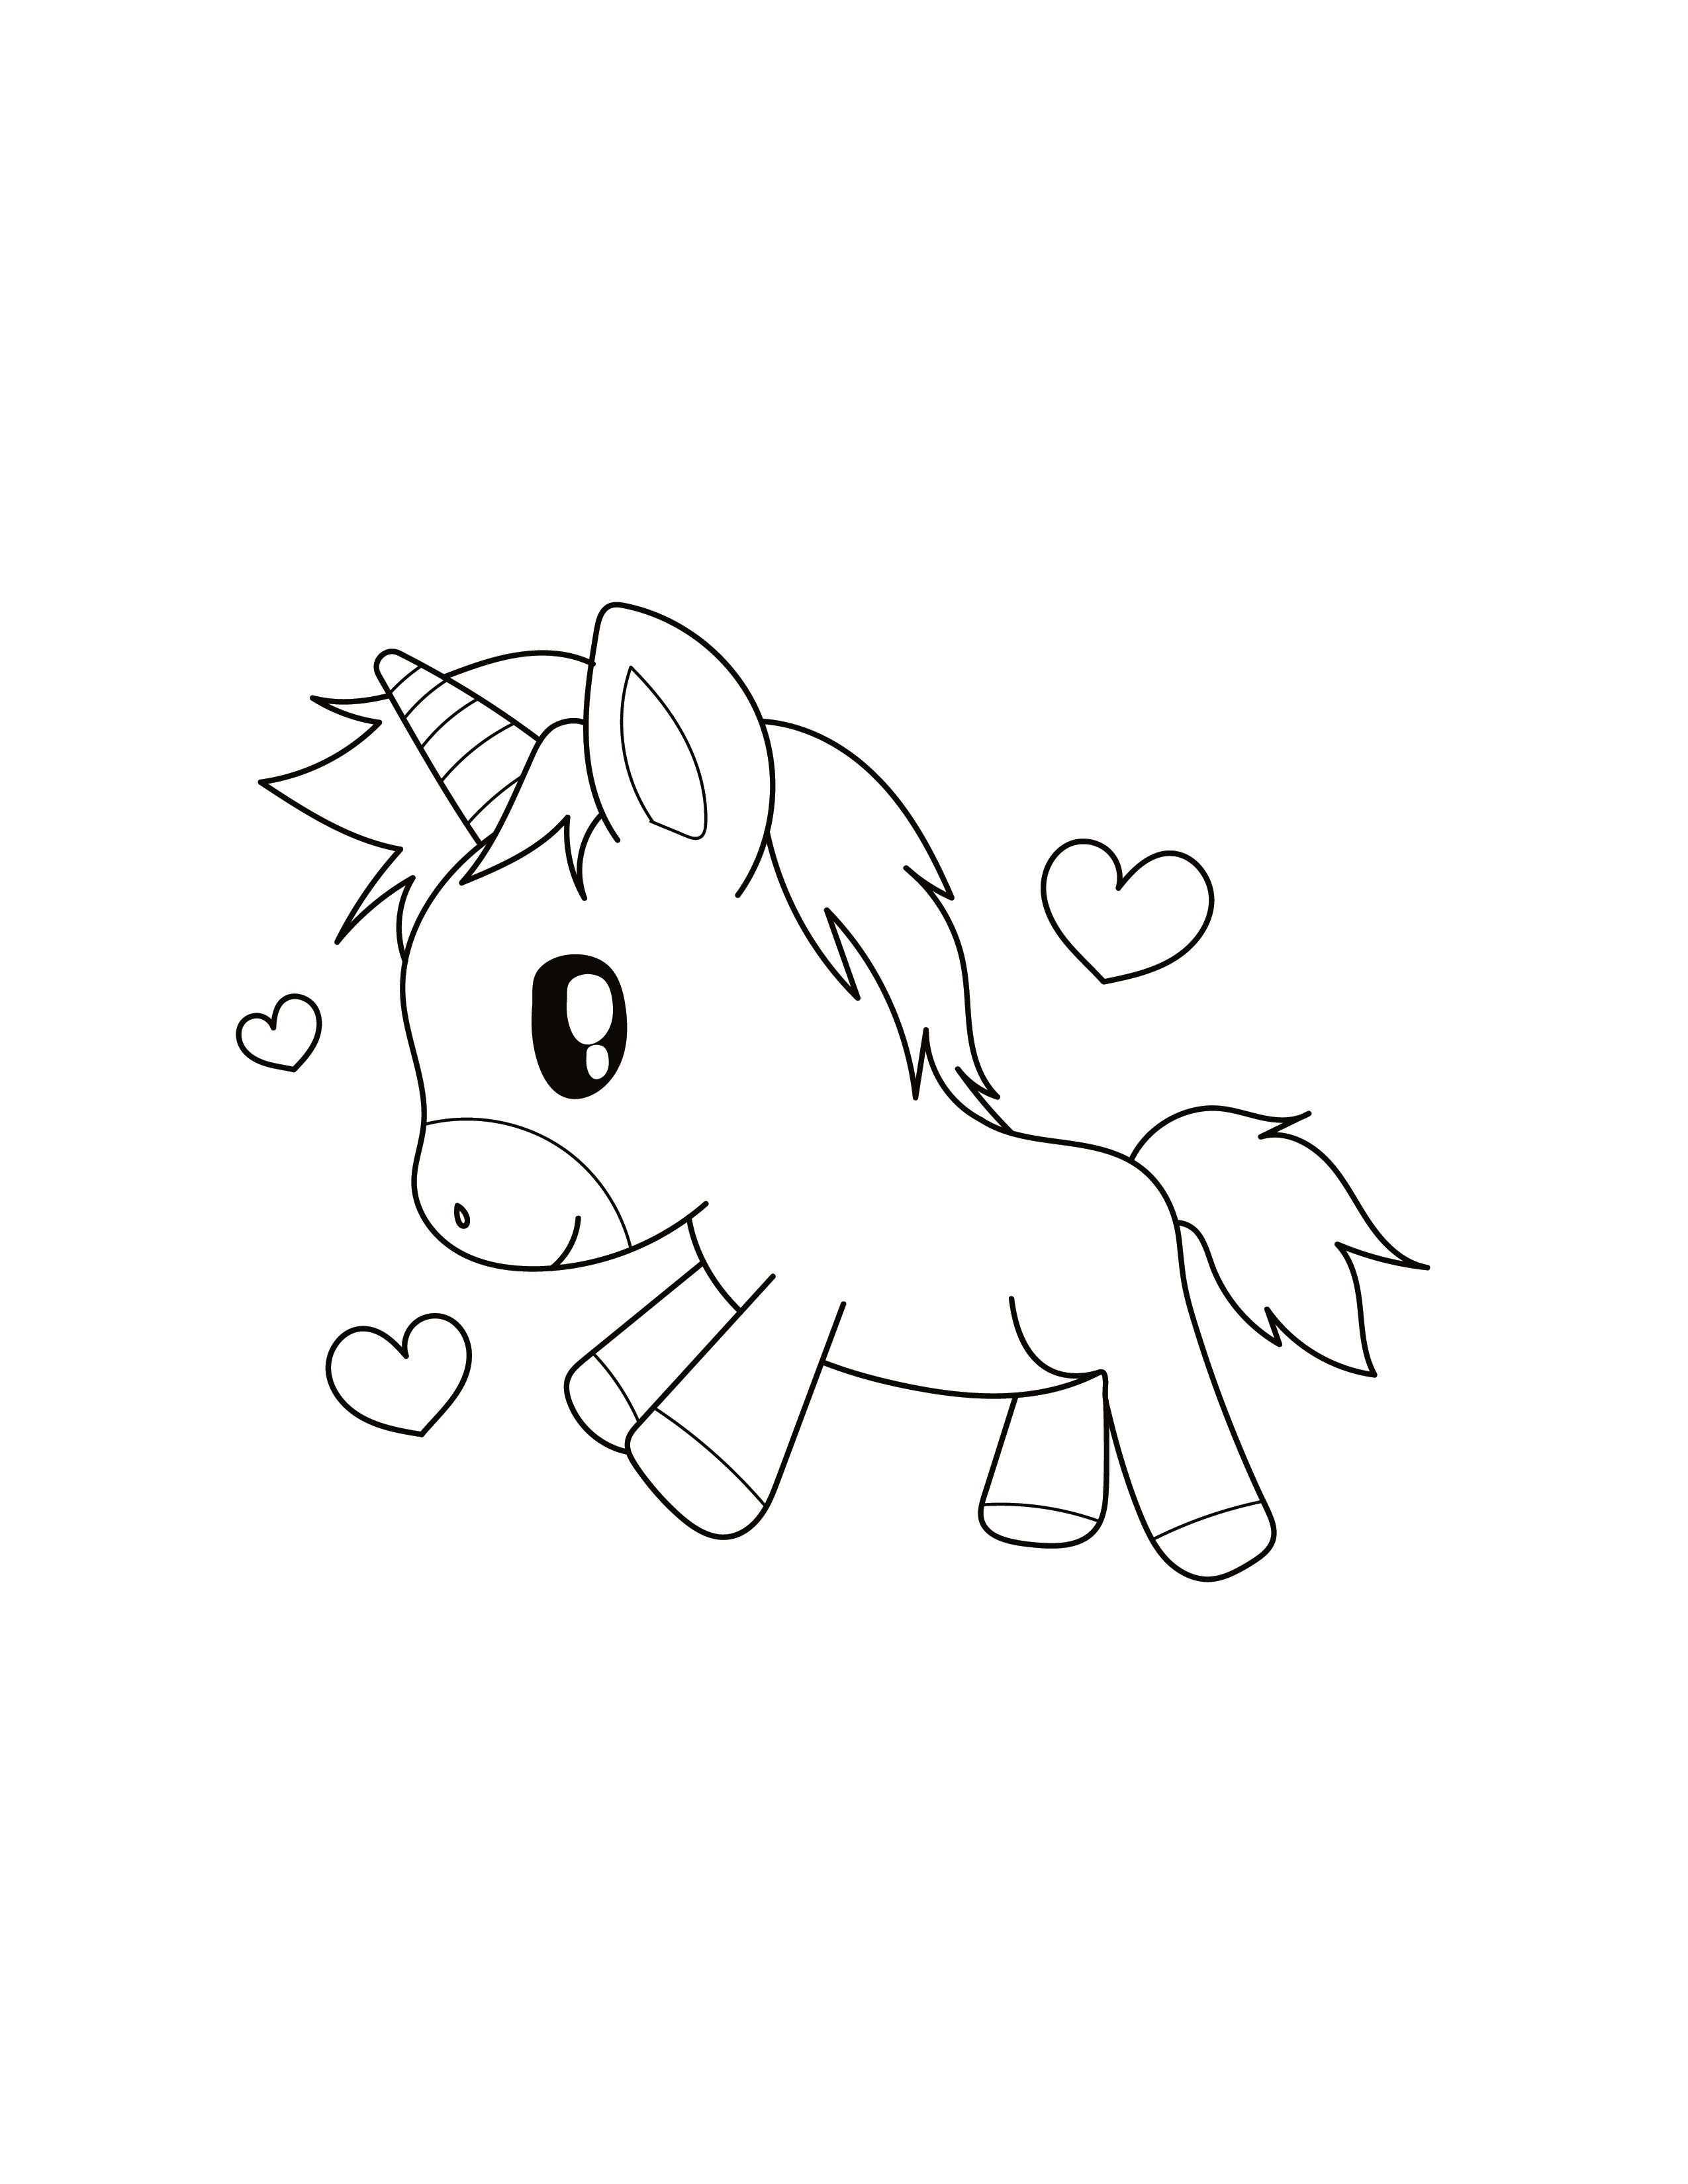 Free Unicorn Coloring Page for Kids   EPS, Illustrator, JPG, PNG ...